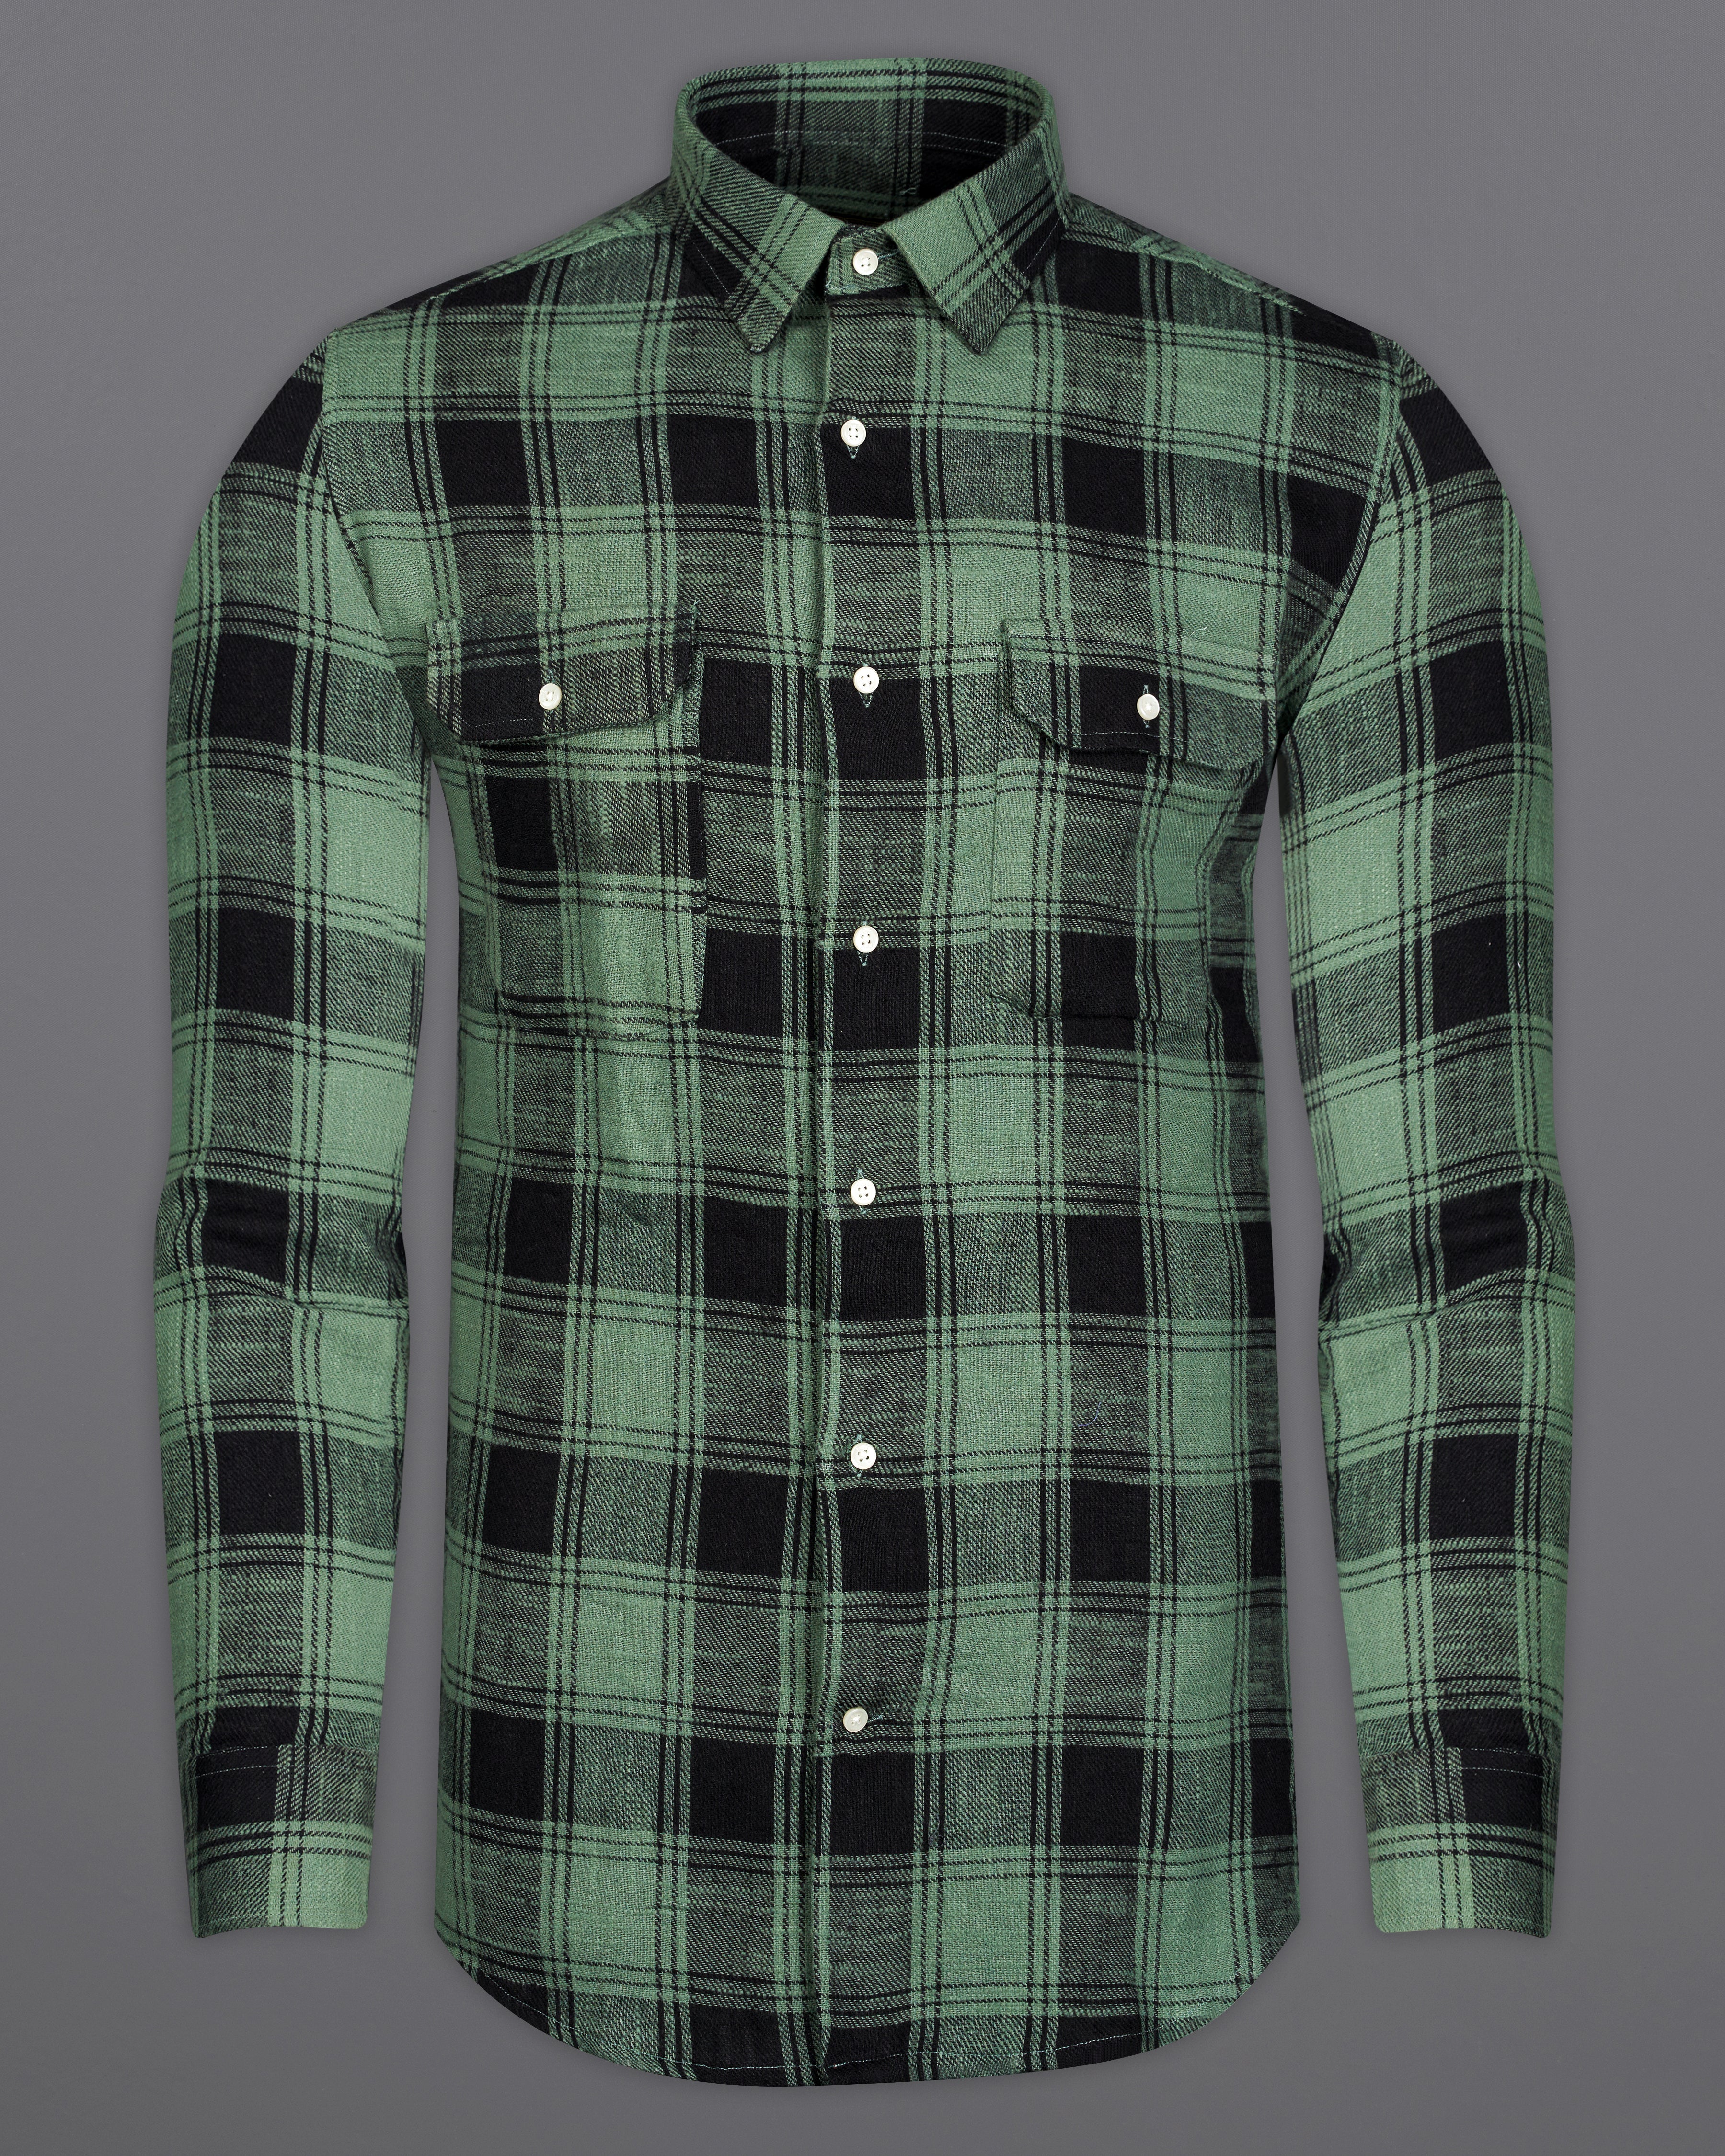 Oxley Green and Black Plaid Flannel Overshirt/Shacket 9883-OS-FP-38, 9883-OS-FP-H-38, 9883-OS-FP-39, 9883-OS-FP-H-39, 9883-OS-FP-40, 9883-OS-FP-H-40, 9883-OS-FP-42, 9883-OS-FP-H-42, 9883-OS-FP-44, 9883-OS-FP-H-44, 9883-OS-FP-46, 9883-OS-FP-H-46, 9883-OS-FP-48, 9883-OS-FP-H-48, 9883-OS-FP-50, 9883-OS-FP-H-50, 9883-OS-FP-52, 9883-OS-FP-H-52